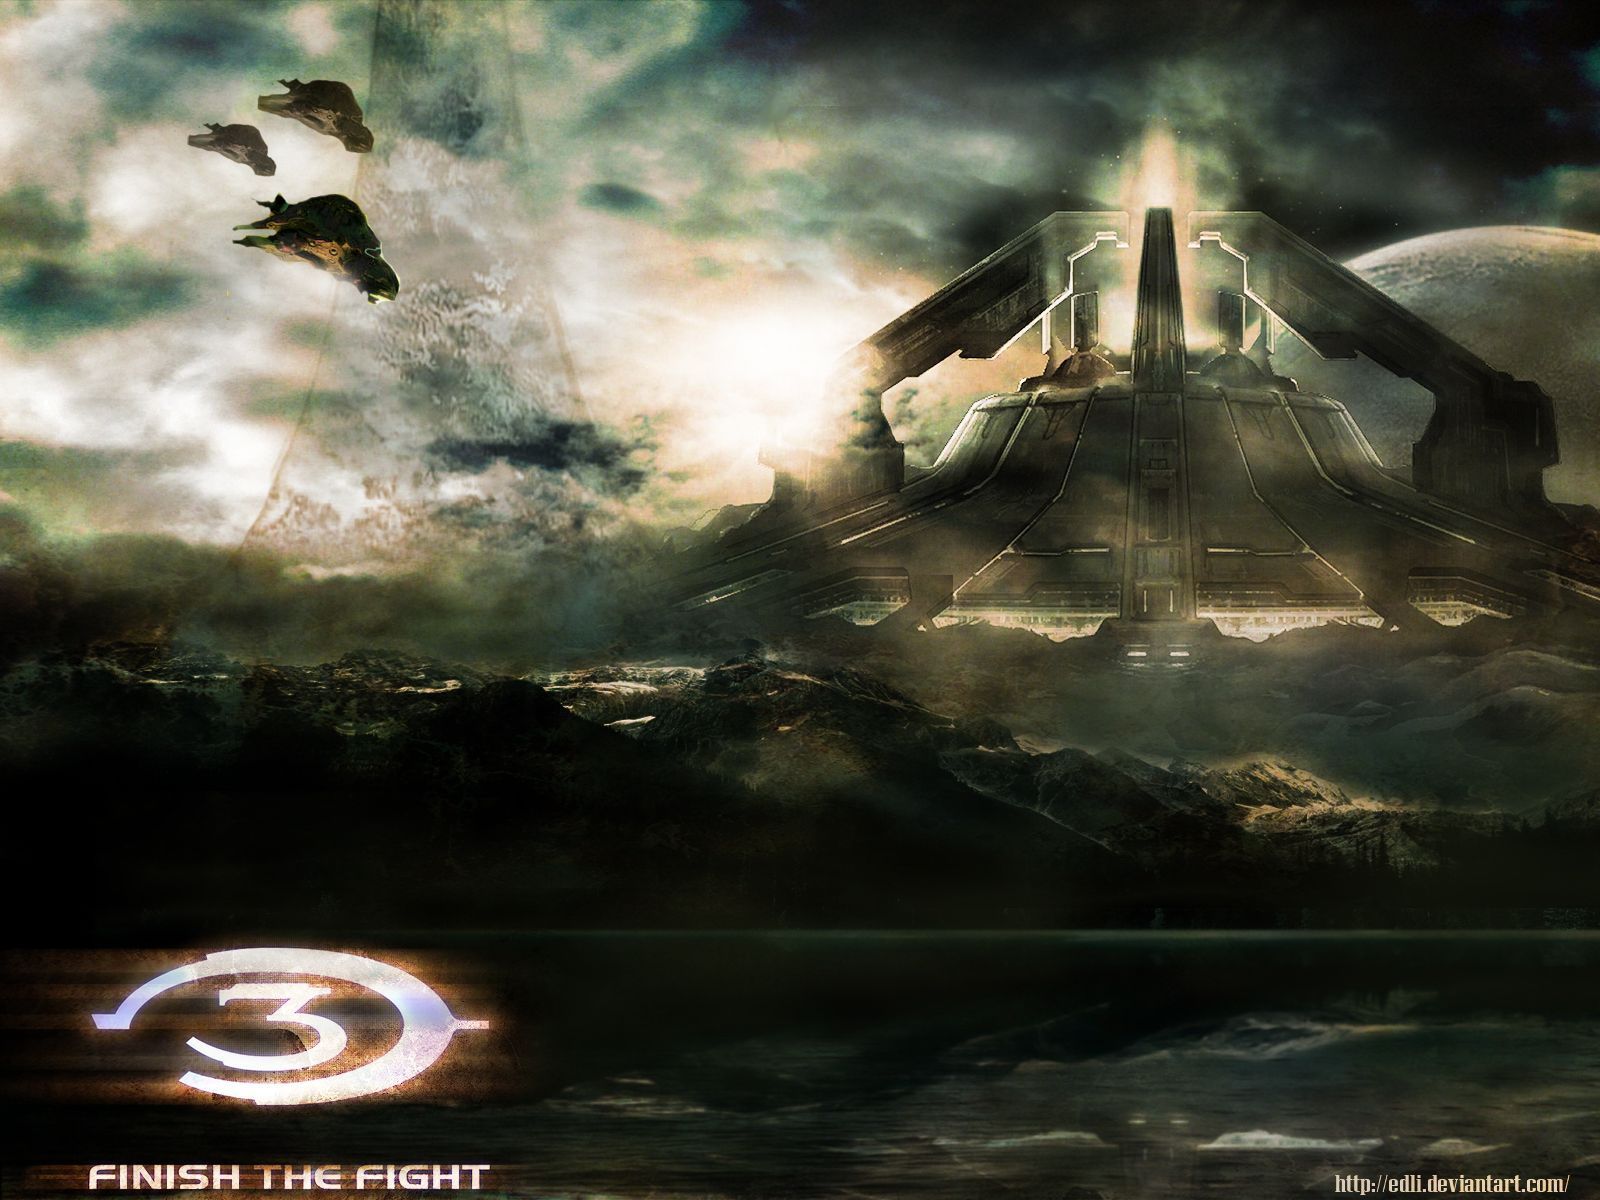 Free Halo Desktop Wallpapers Background For Windows and Mac OS